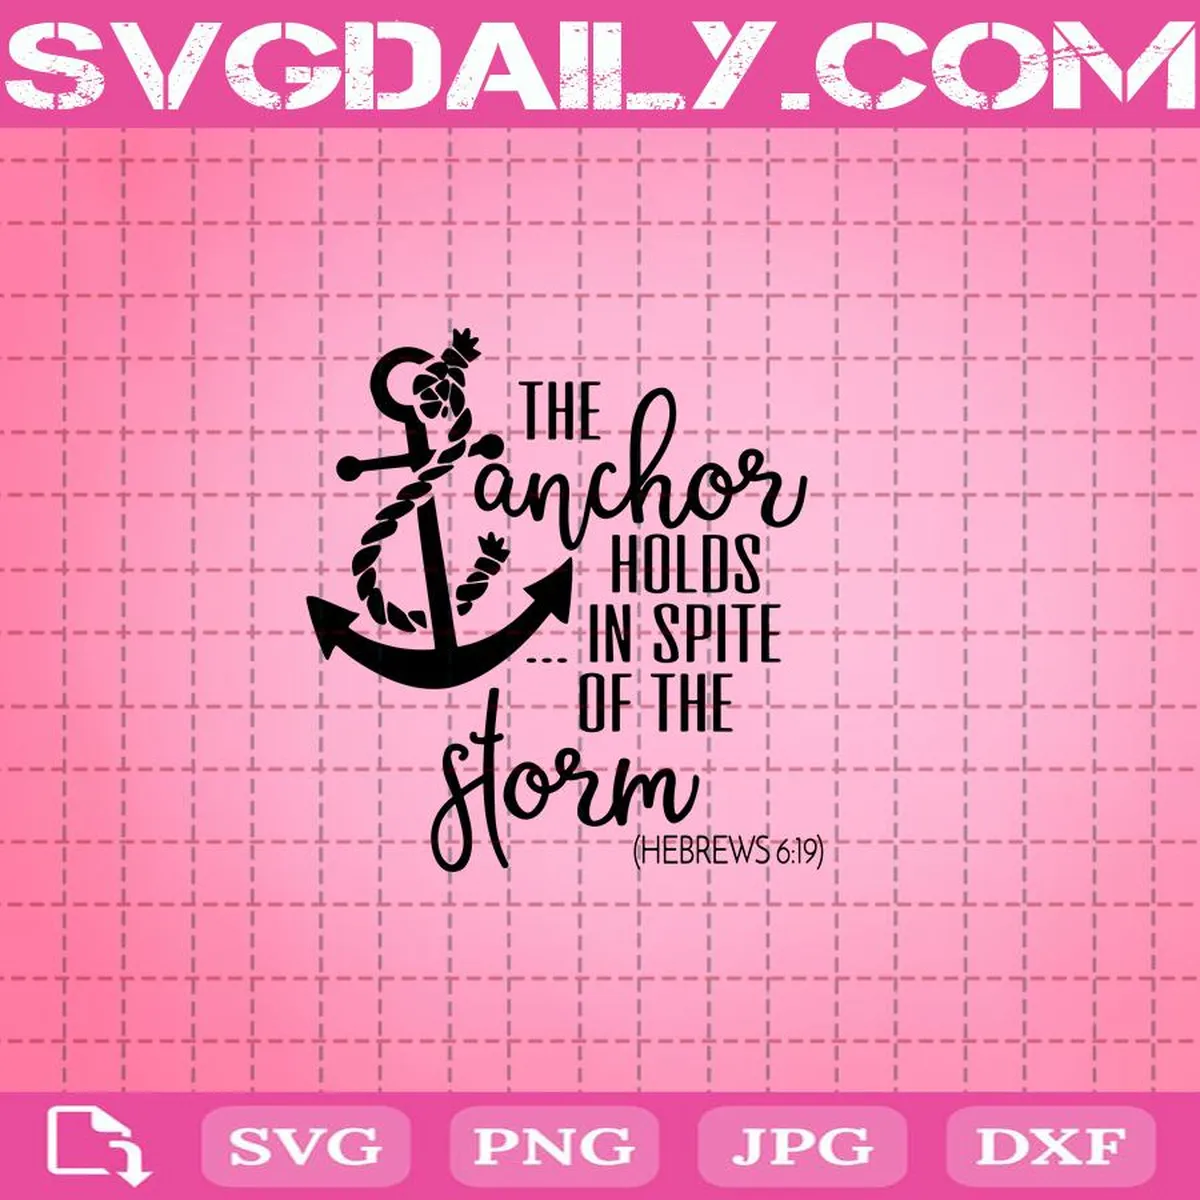 The Anchor Holds In Spite Of The Storm Svg, Christian Svg, Religious Svg, Svg Png Dxf Eps Instant Download